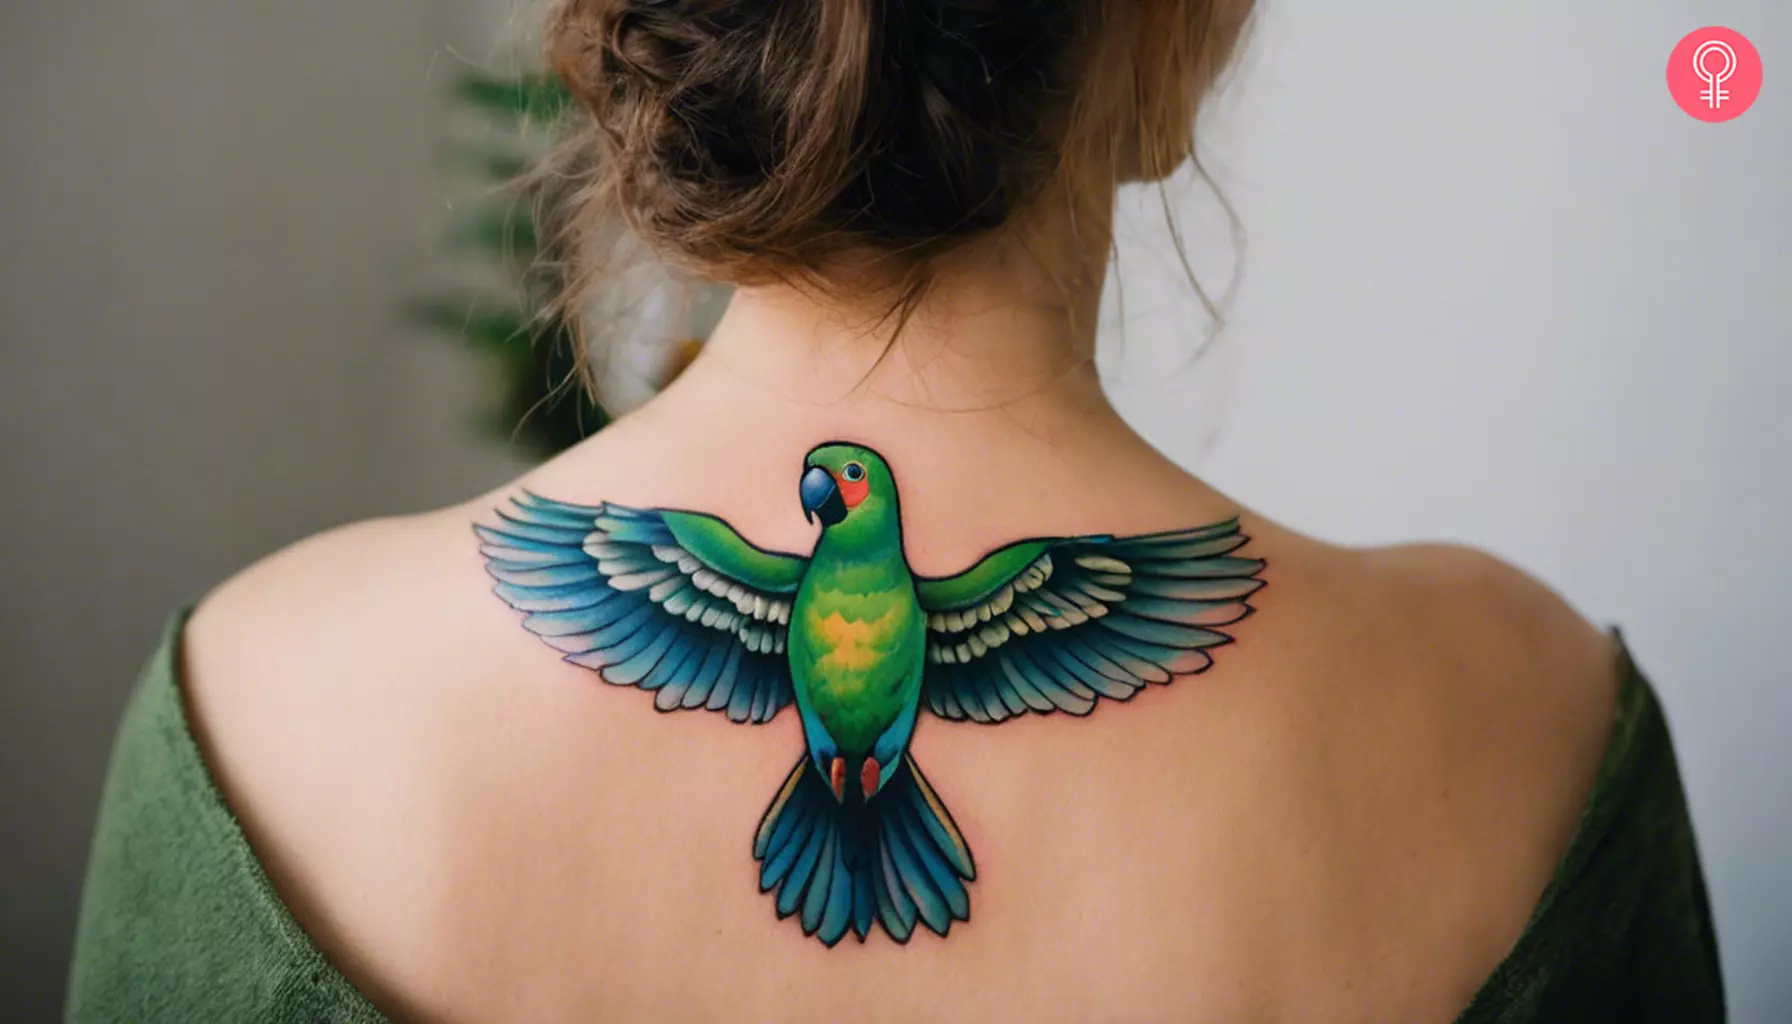 Woman with Quaker parrot tattoo on her upper back